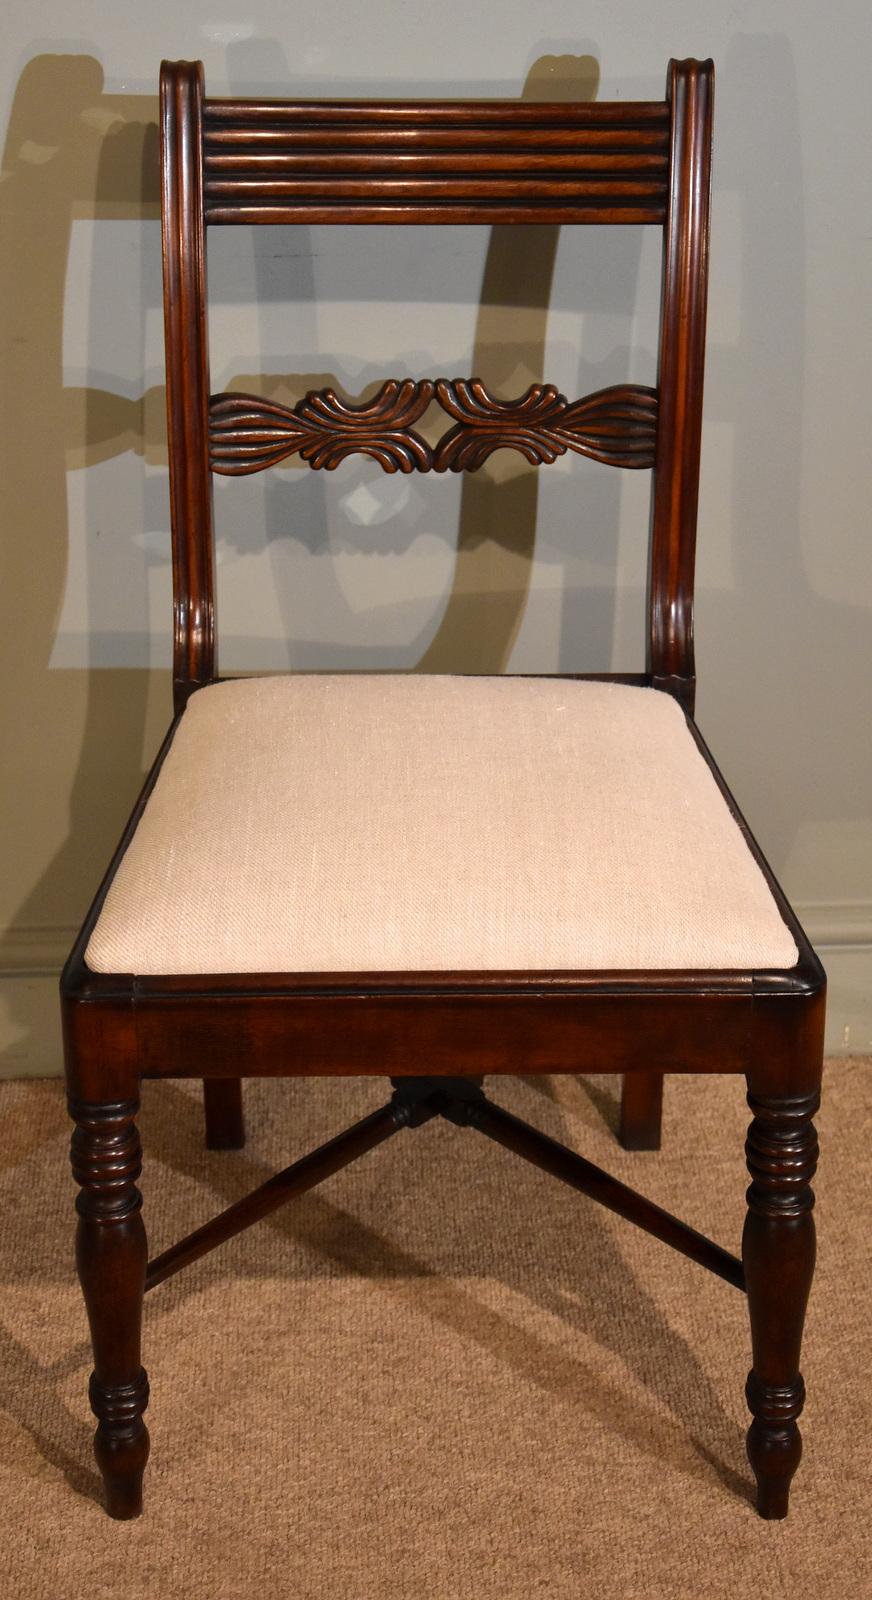 A very attractive set of six superior quality Regency period mahogany dining chairs 

Dimensions single chair
Height 34.5